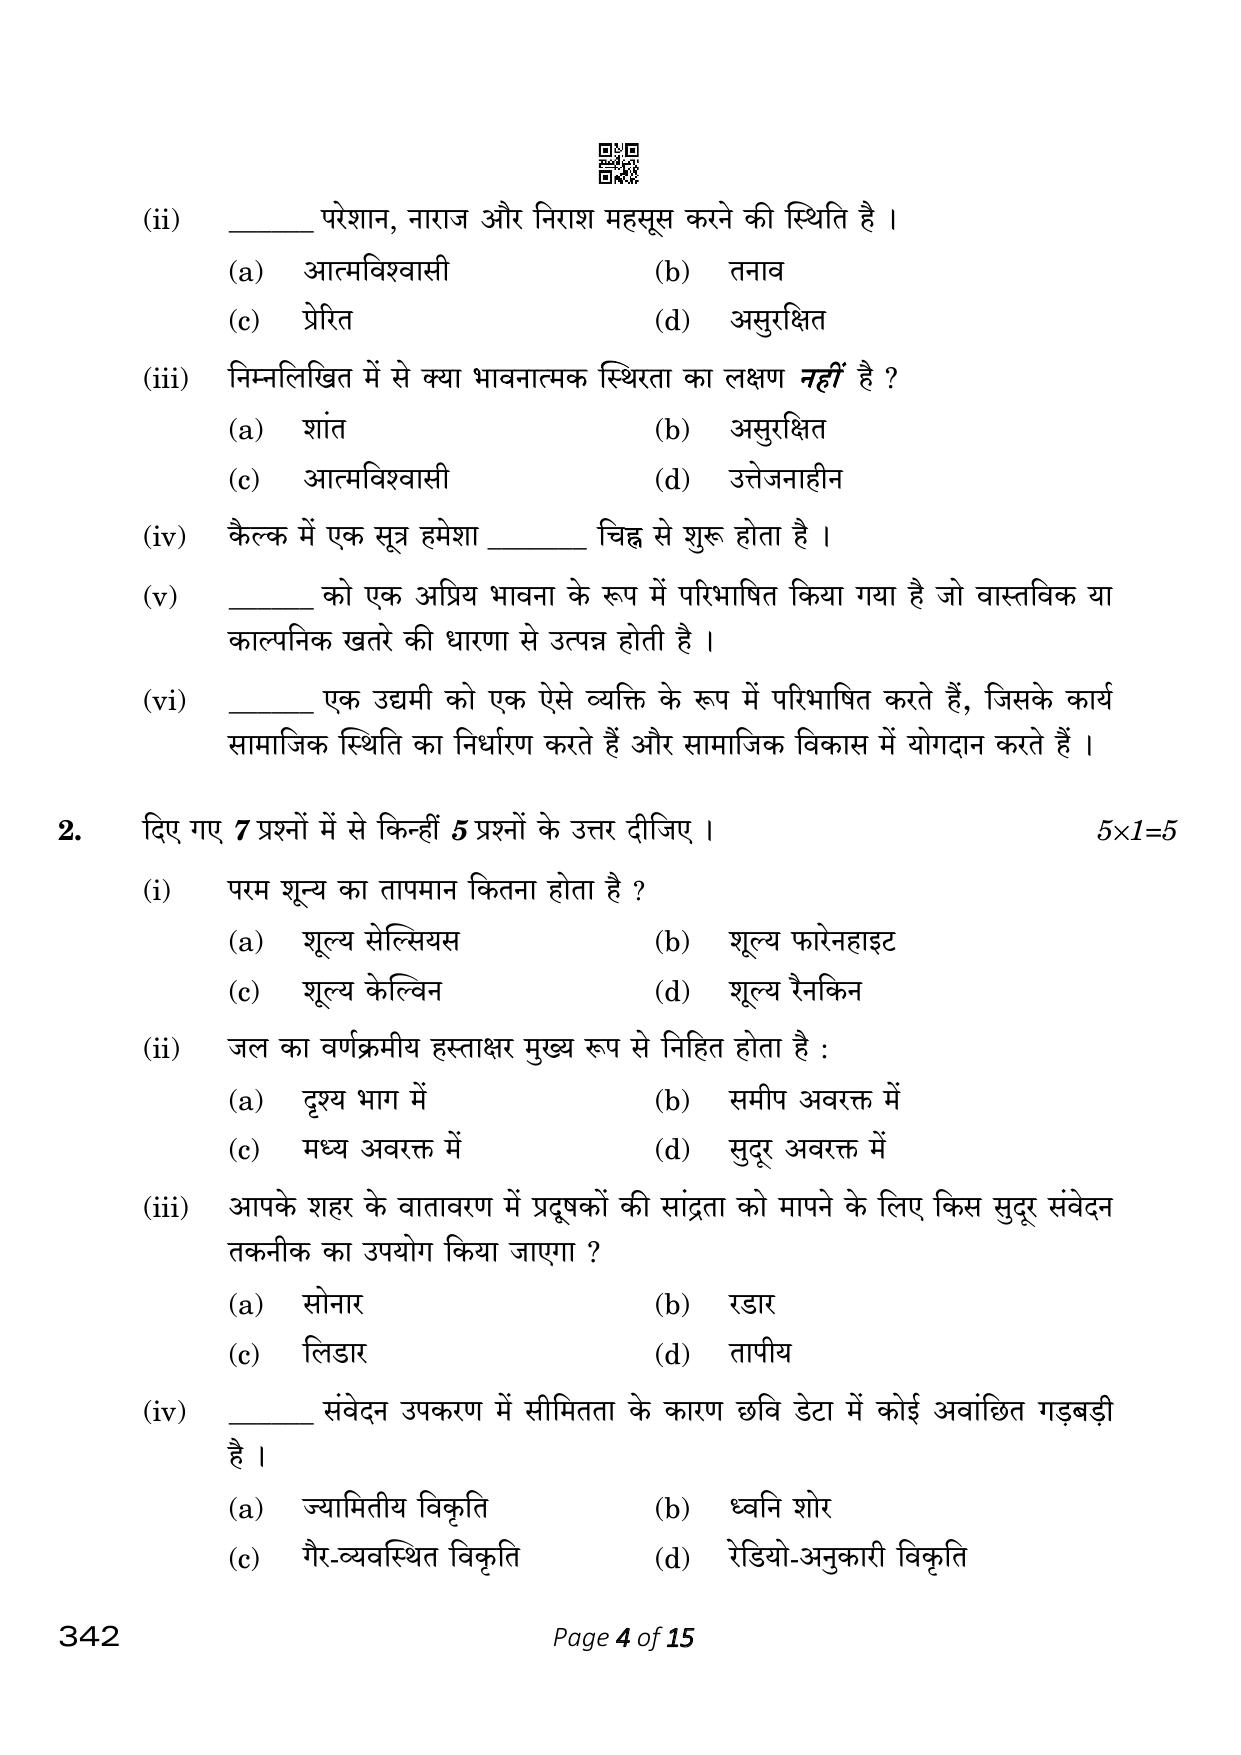 CBSE Class 12 342_Geospatial Technology 2023 Question Paper - Page 4